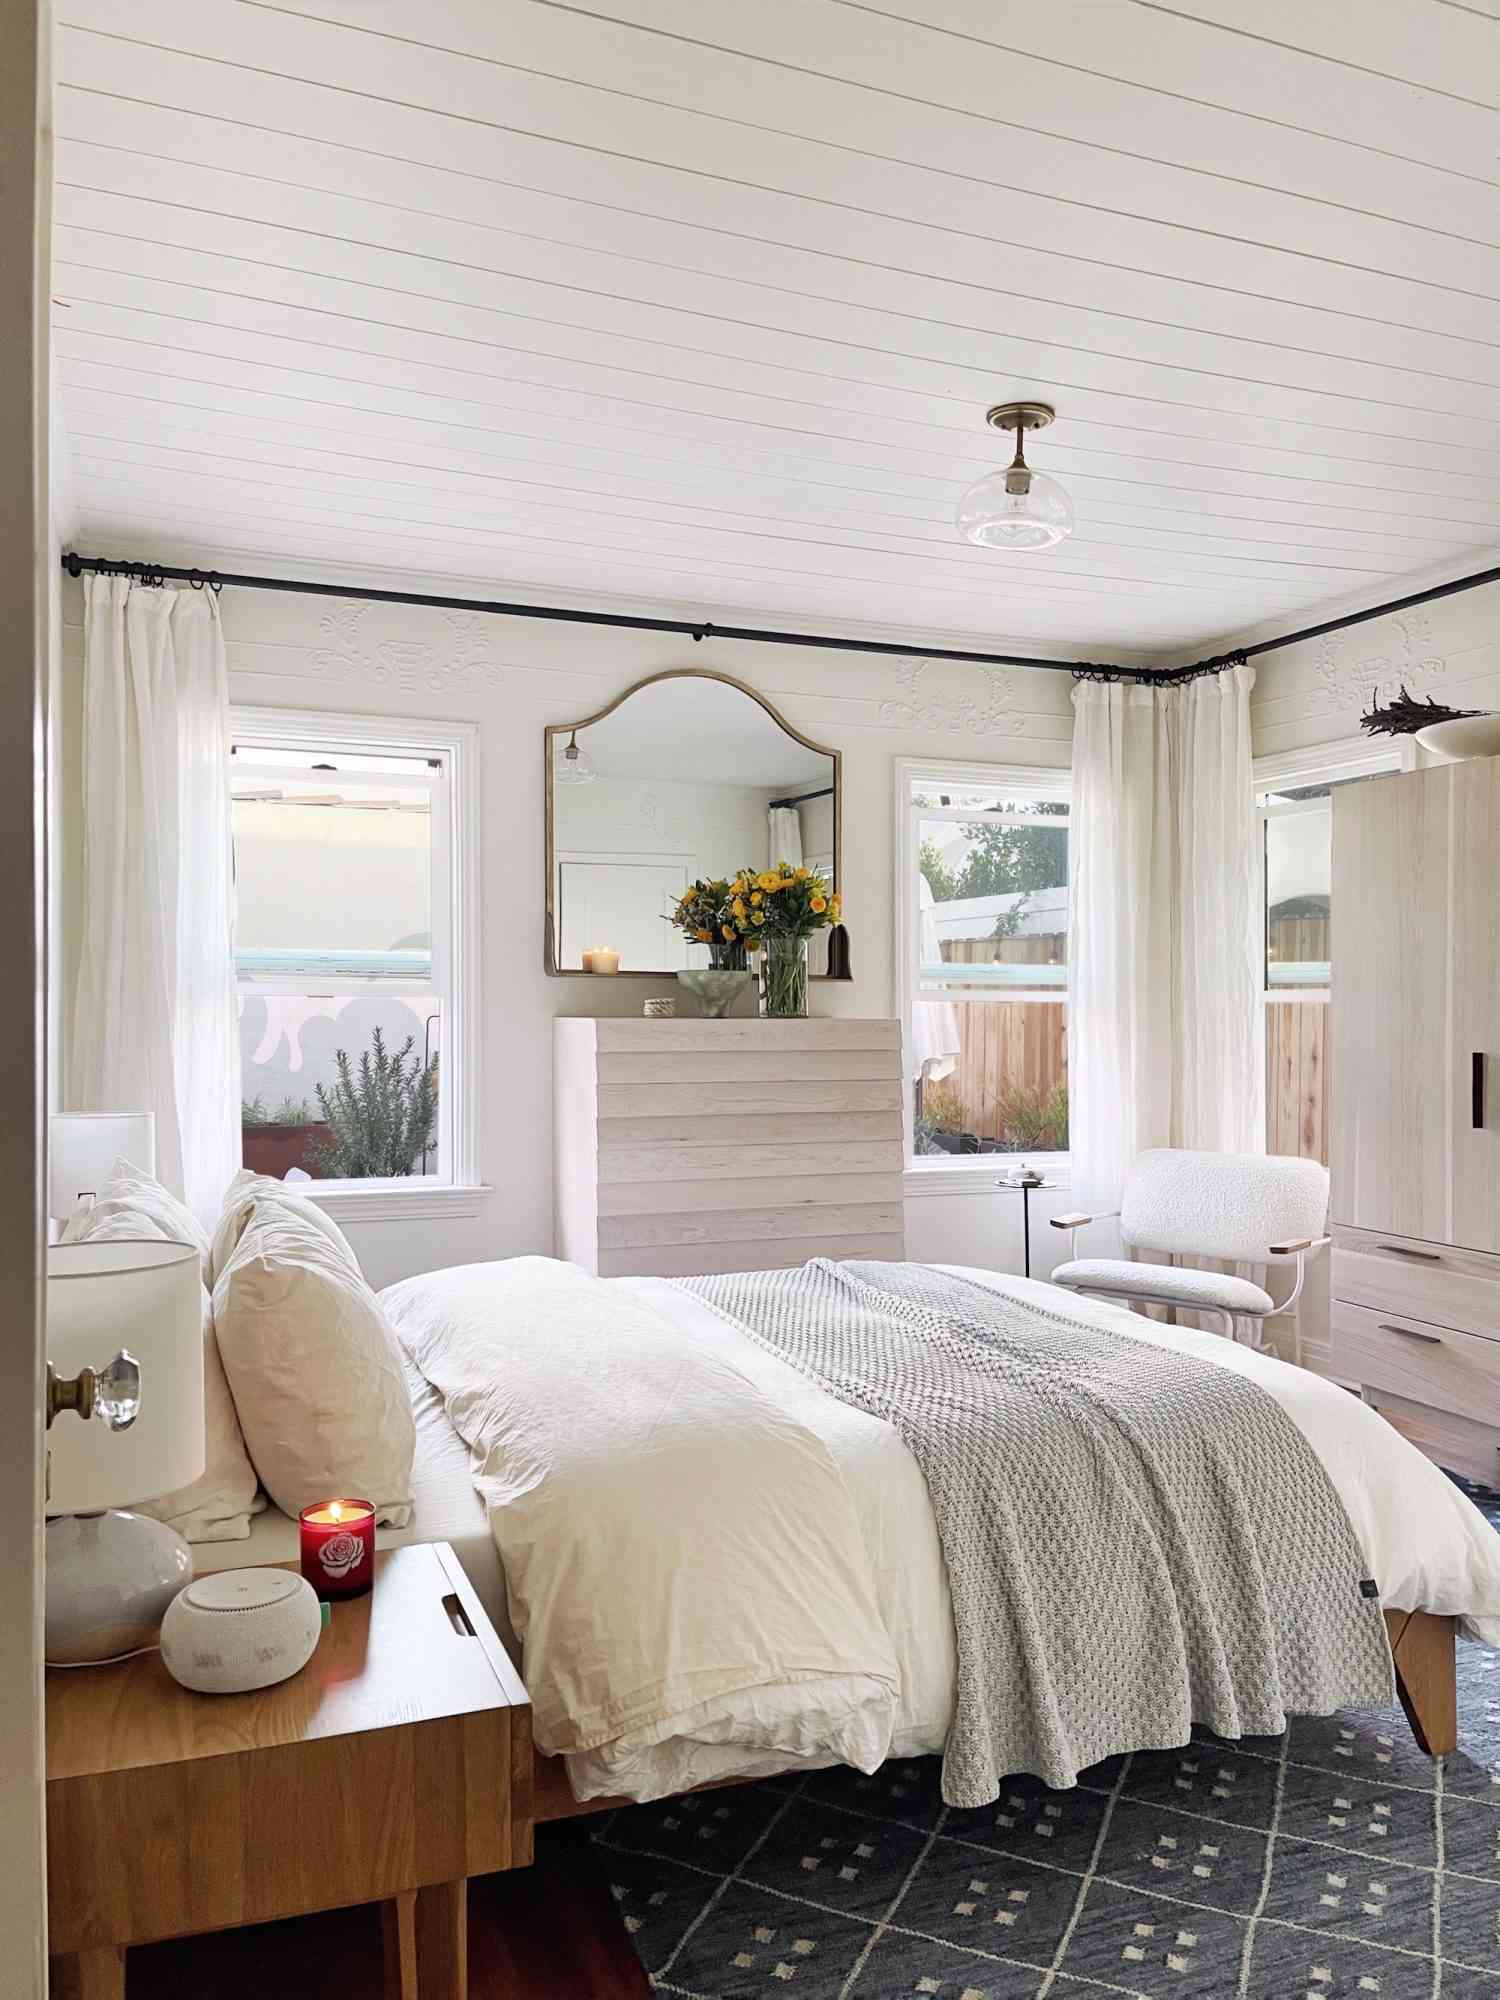 Bedroom with neutral bedding, white curtains, and shiplap ceiling